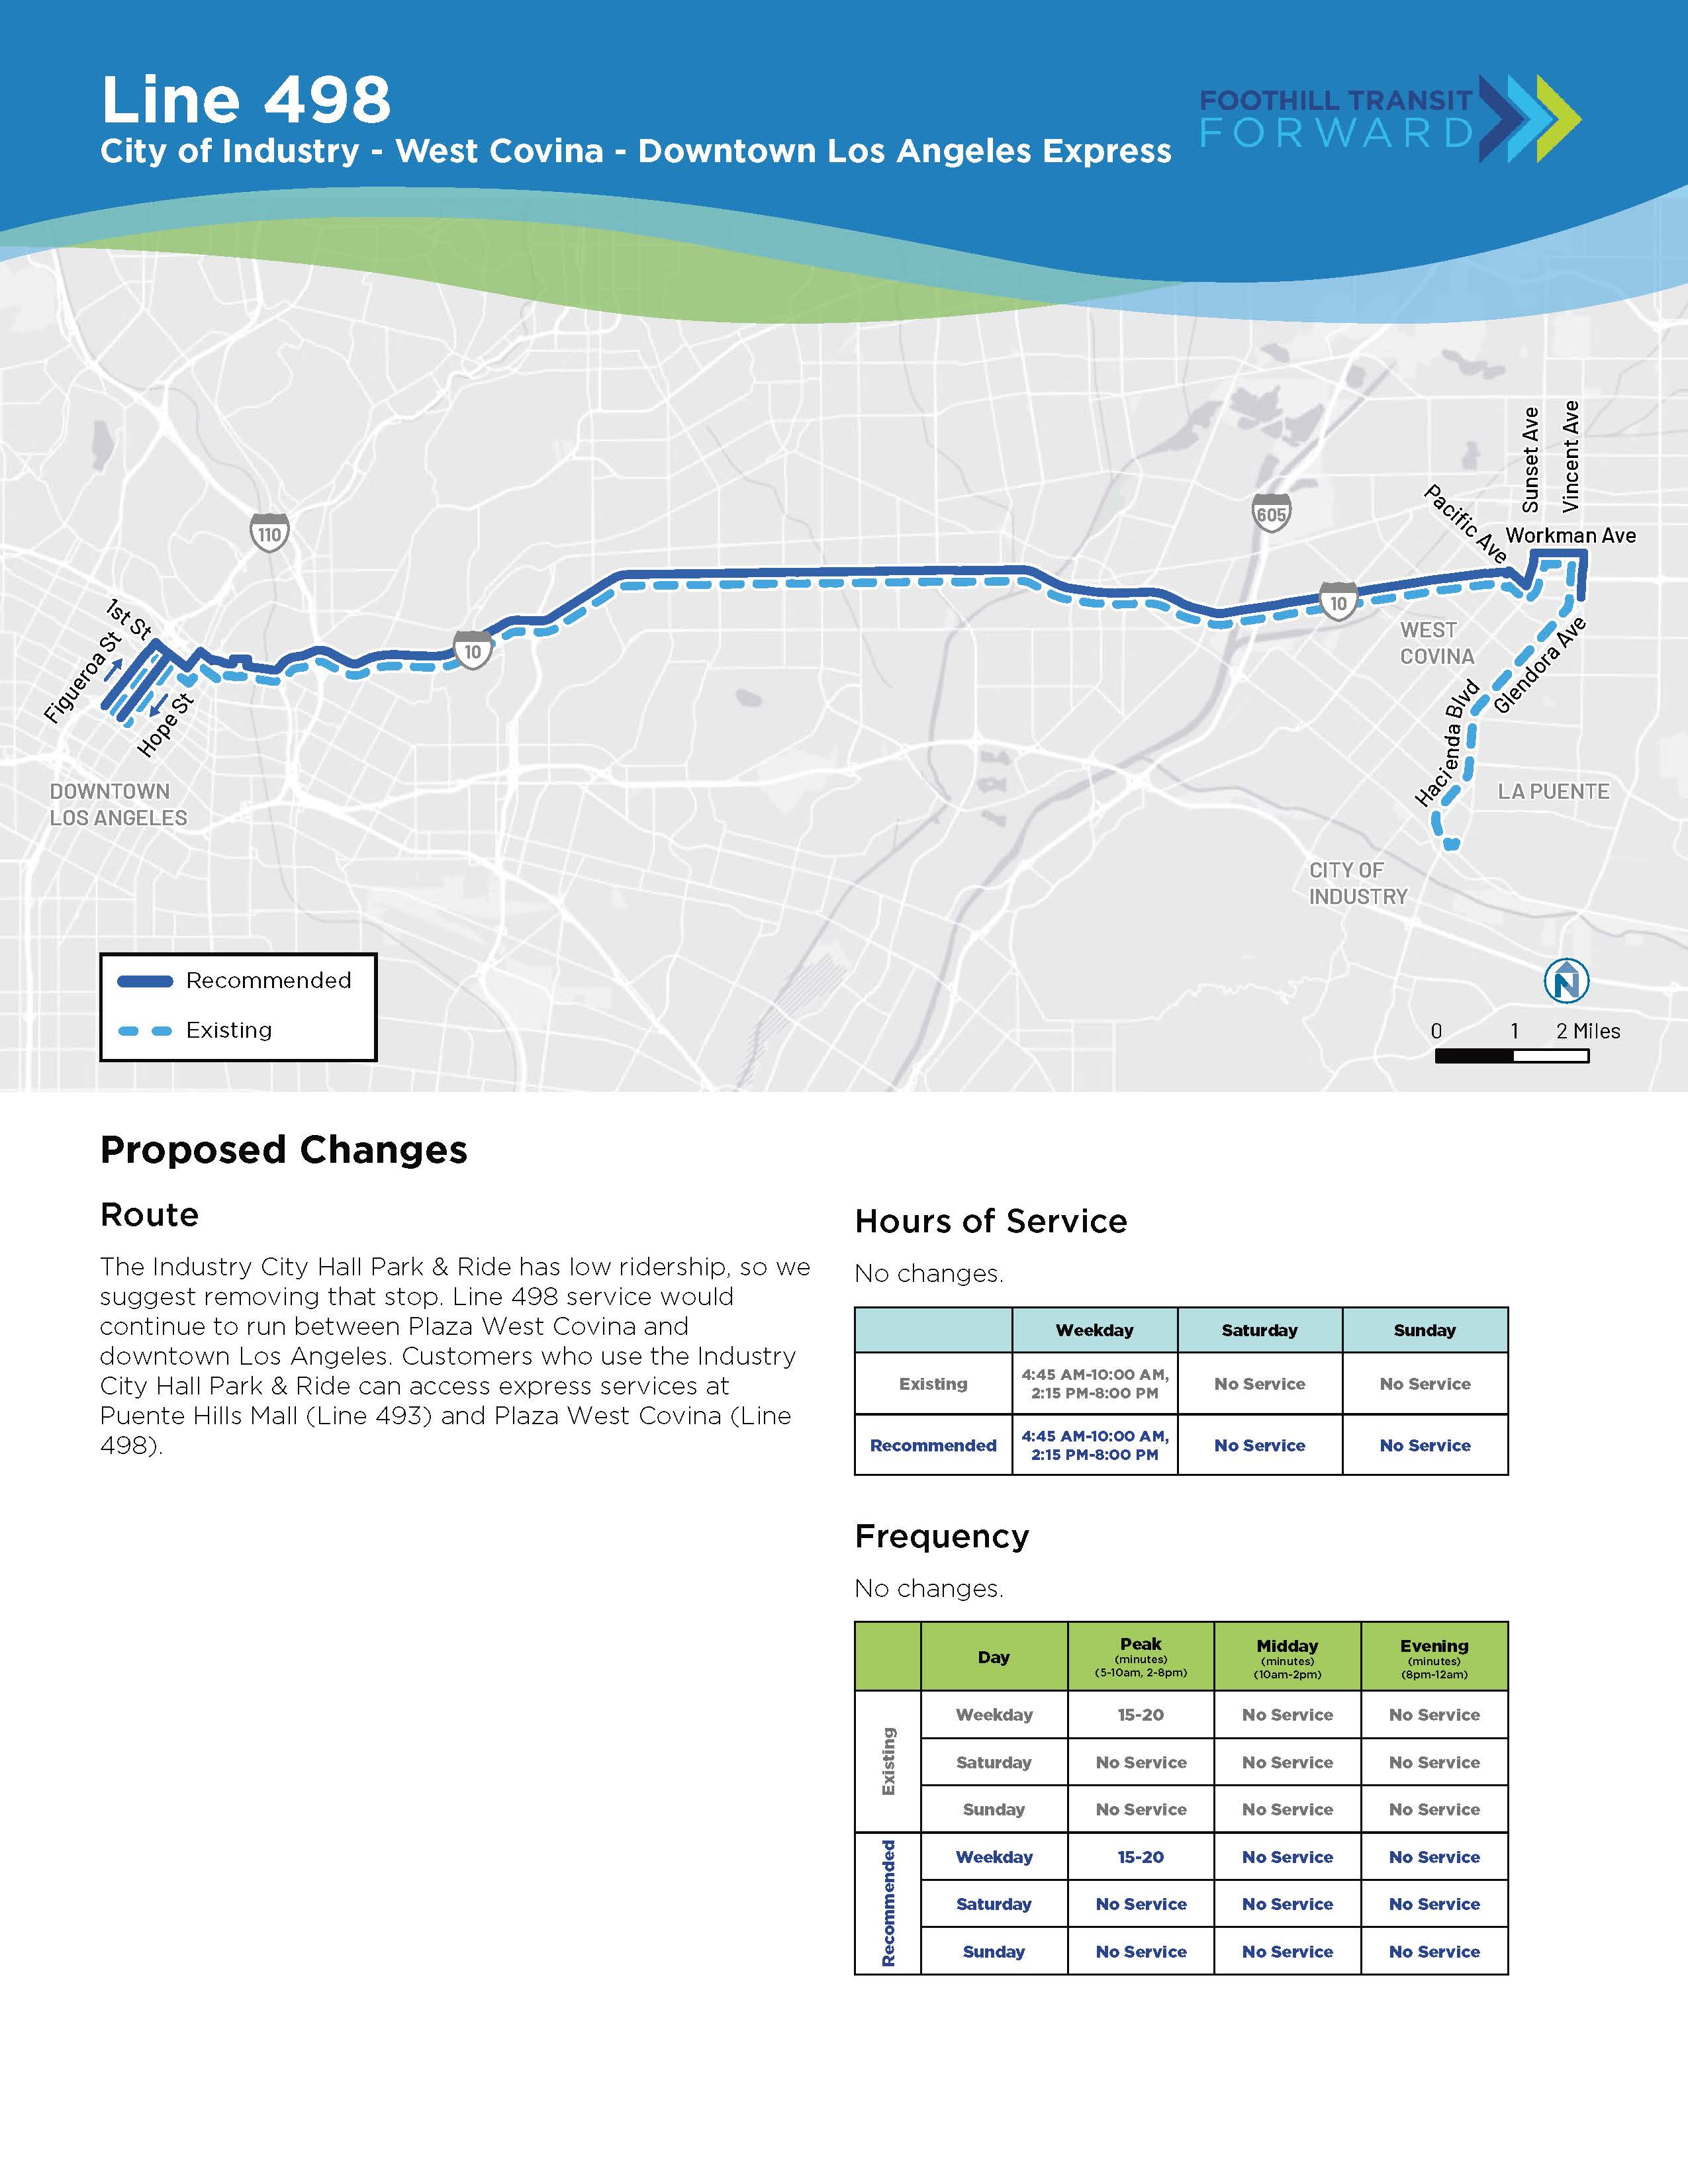 Proposed Changes: Route: The Industry City Hall Park & Ride has low ridership, so we suggest removing that stop. Line 498 service would continue to run between Plaza West Covina and downtown Los Angeles. Customers who use the Industry City Hall Park & Ride can access express services at Puente Hills Mall (Line 493) and Plaza West Covina (Line 498). Hours of Service: No changes. Frequency: No changes.